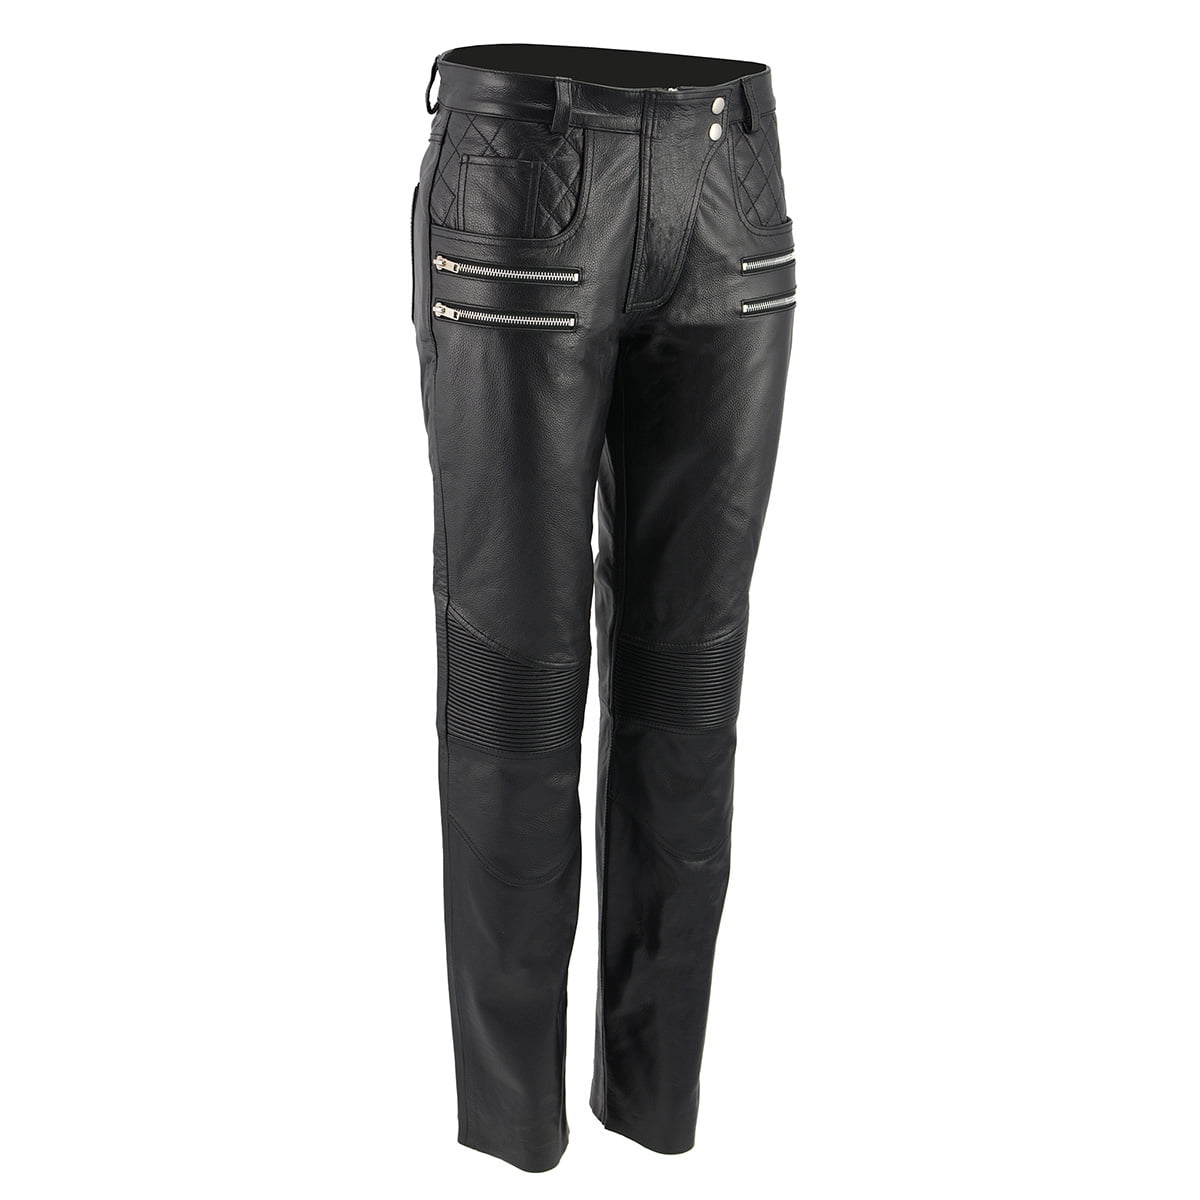 Womens Leather Motorcycle Pants - Black